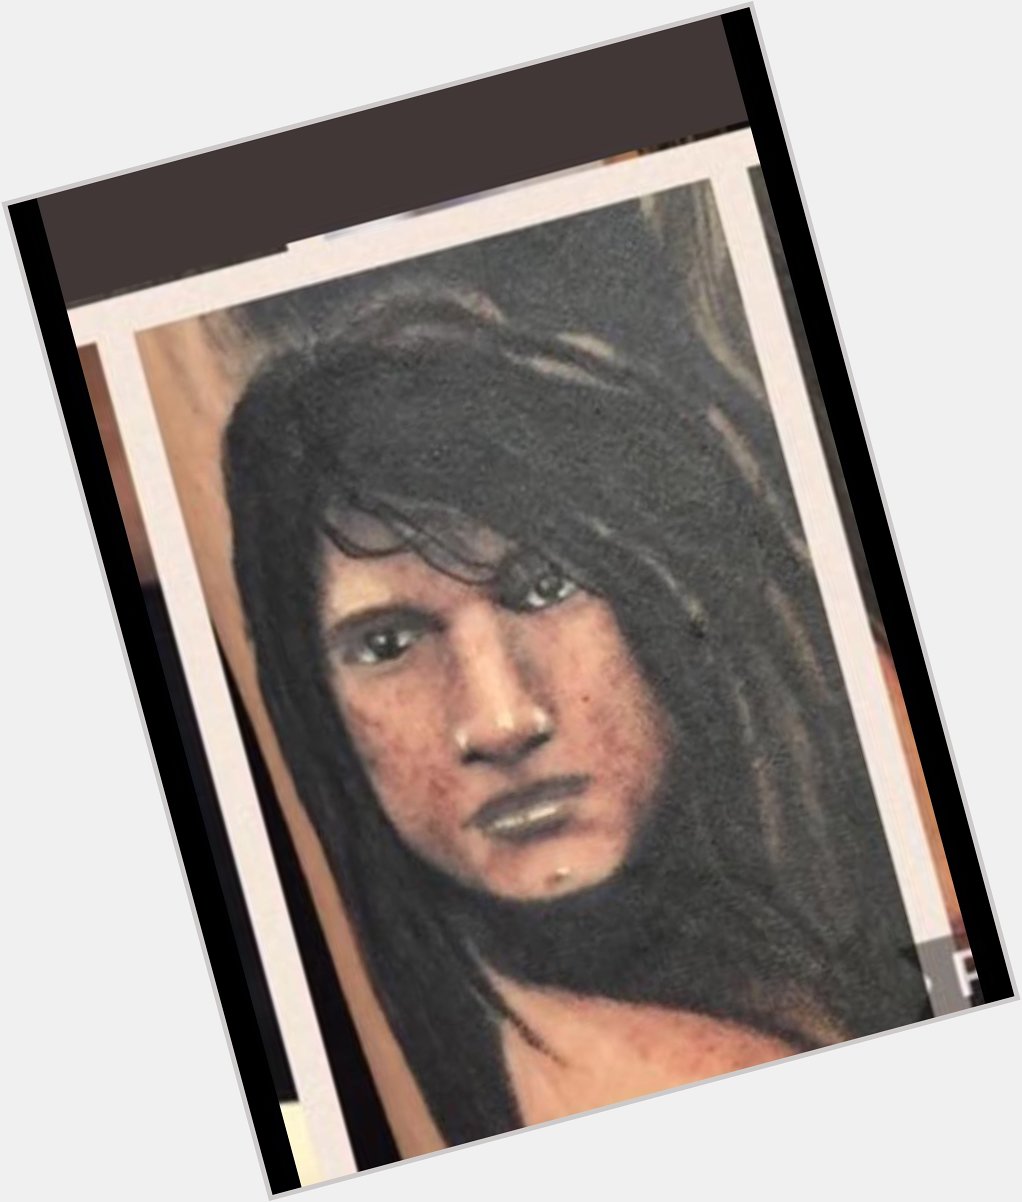 Happy Birthday Check out my Bruce Kulick portrait tattoo!!! 